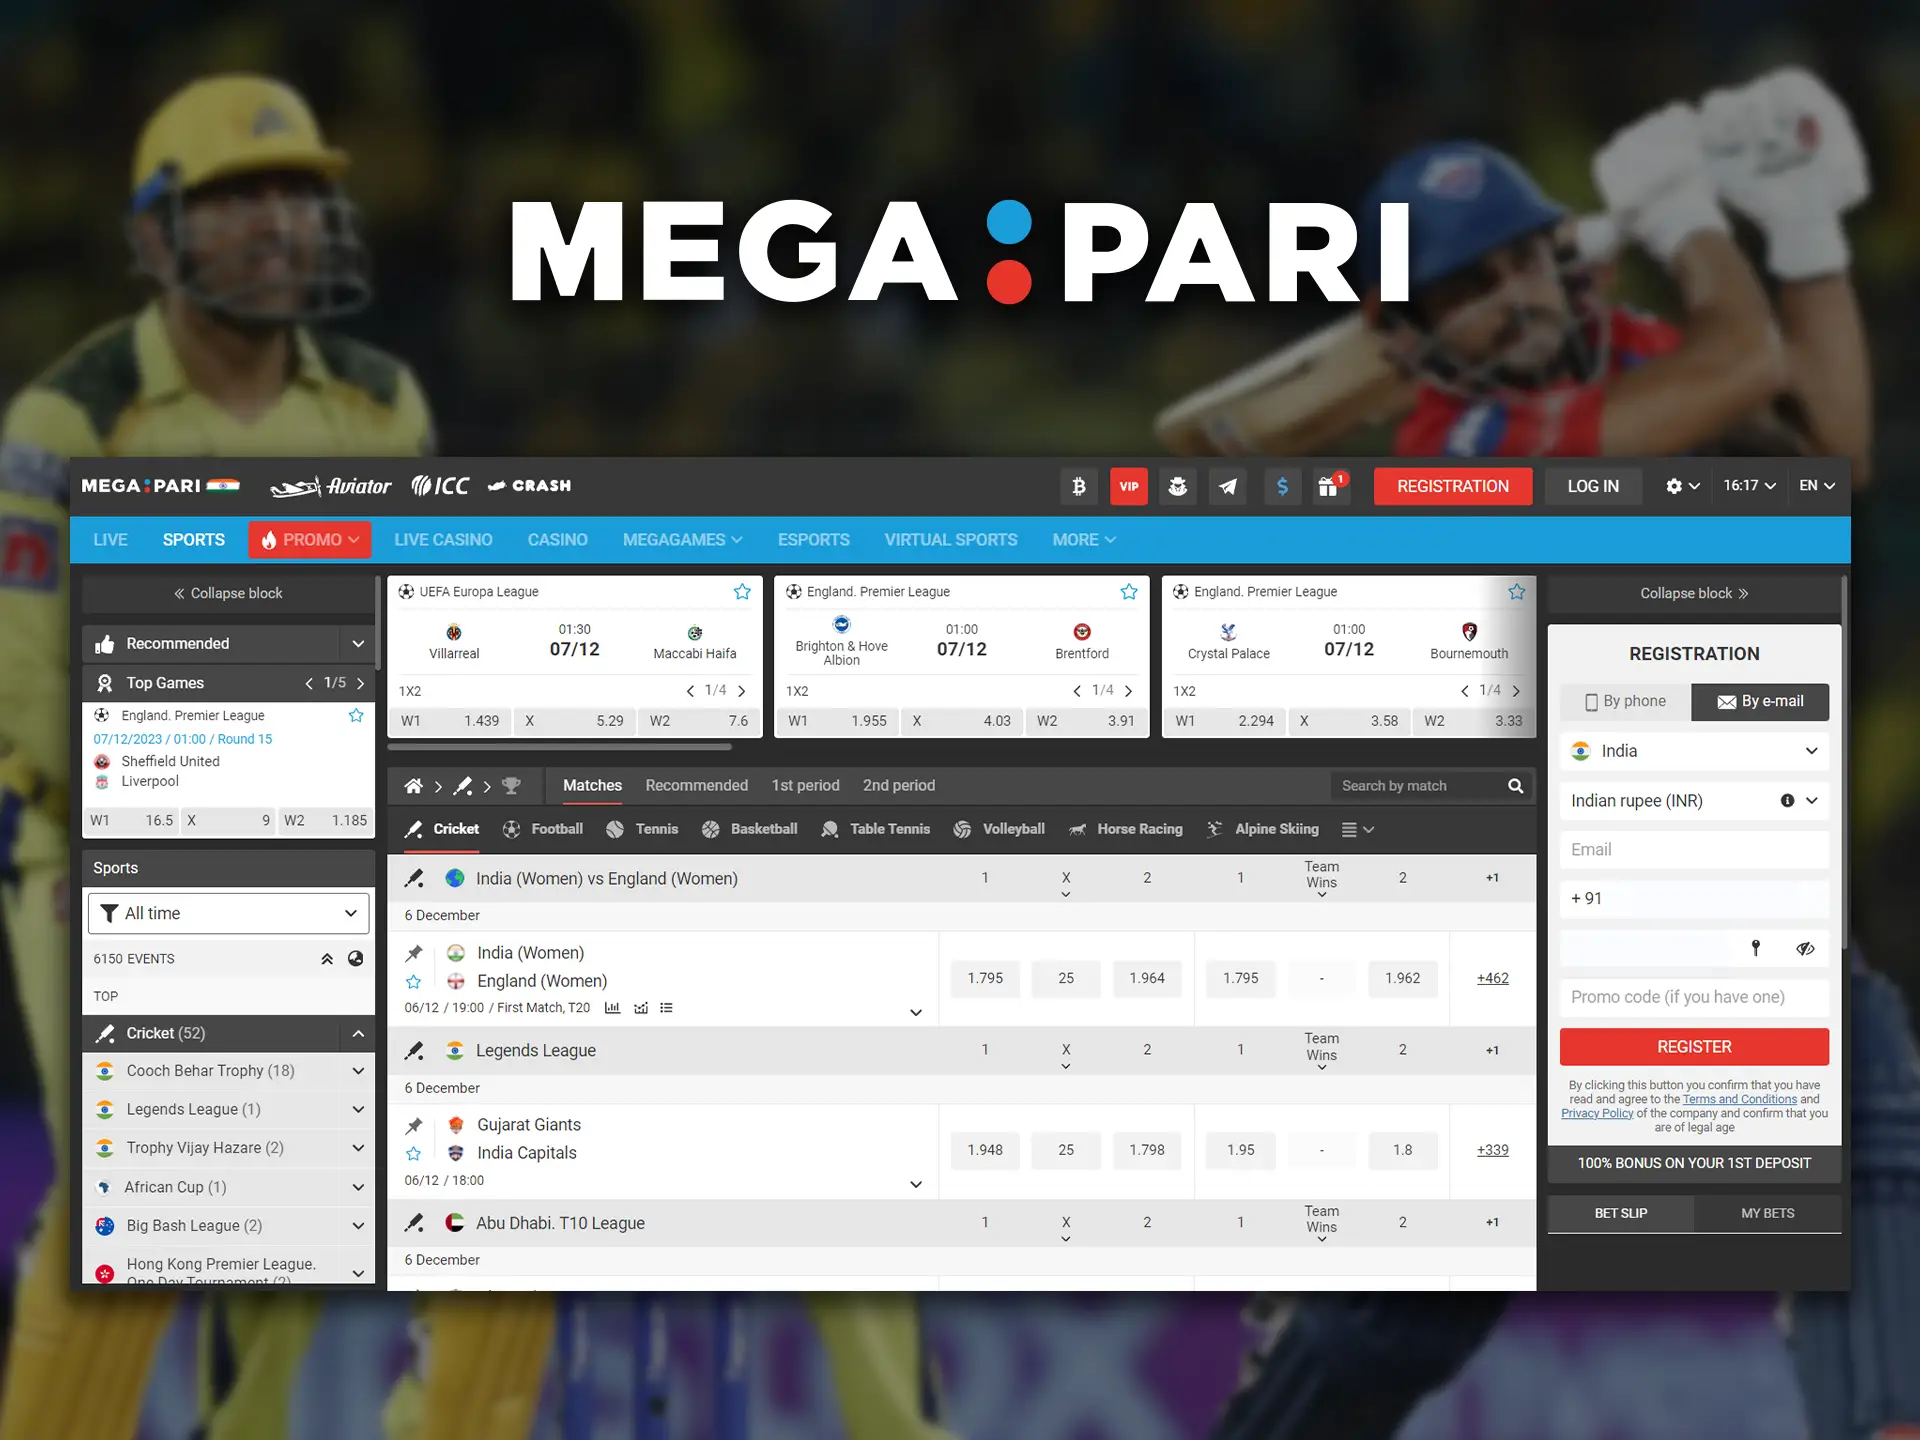 Megapari is one of the best online cricket betting sites with a variety of available sporting events.